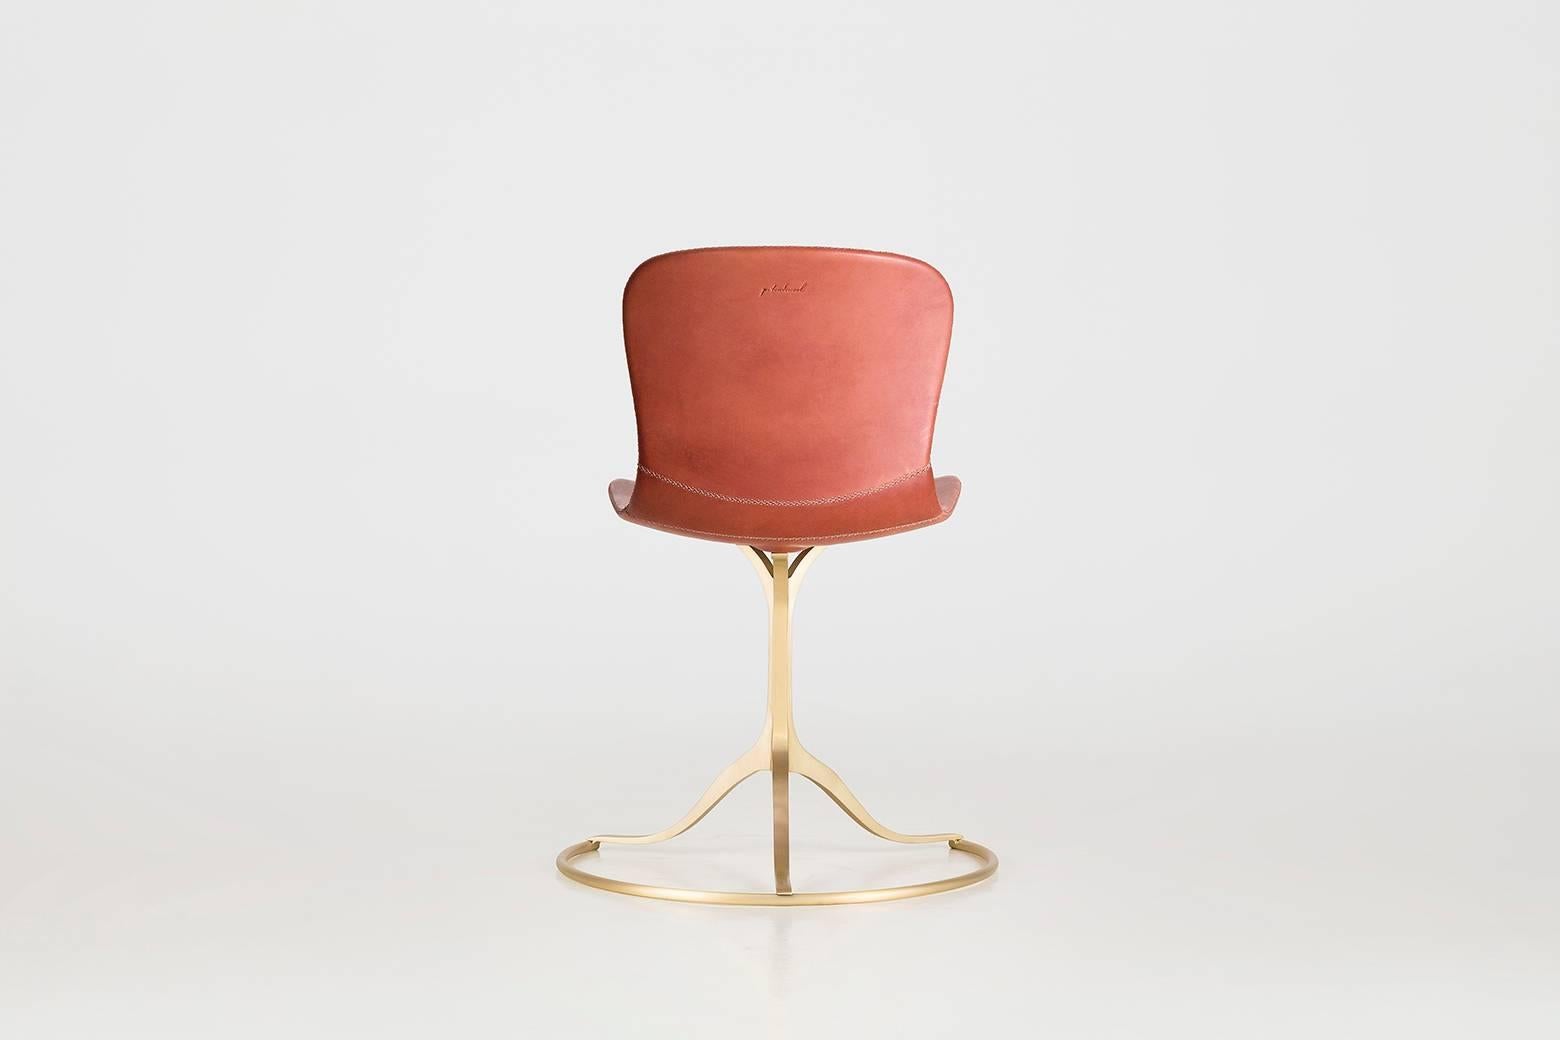 Mid-Century Modern Bespoke Sand Cast Brass Chair in Vieux Rose Leather, by P. Tendercool For Sale